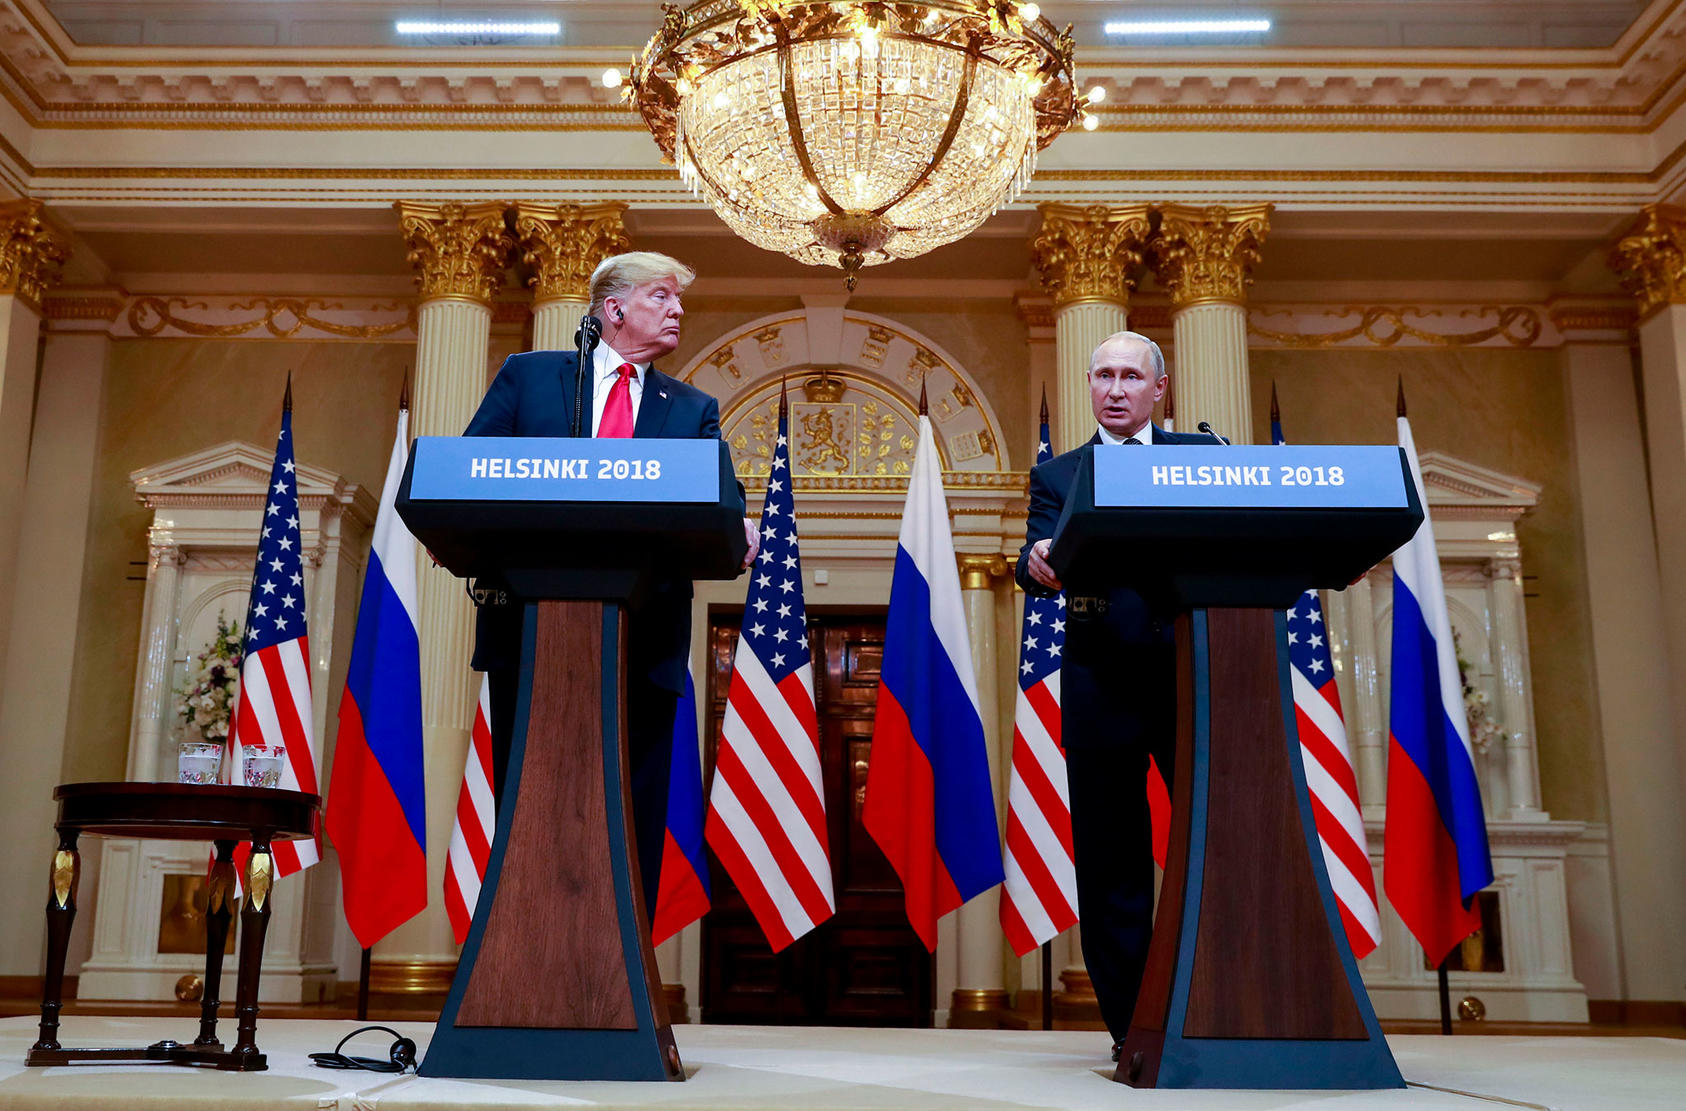 President Donald Trump and President Vladimir Putin of Russia appear at a joint news conference in Helsinki, Finland